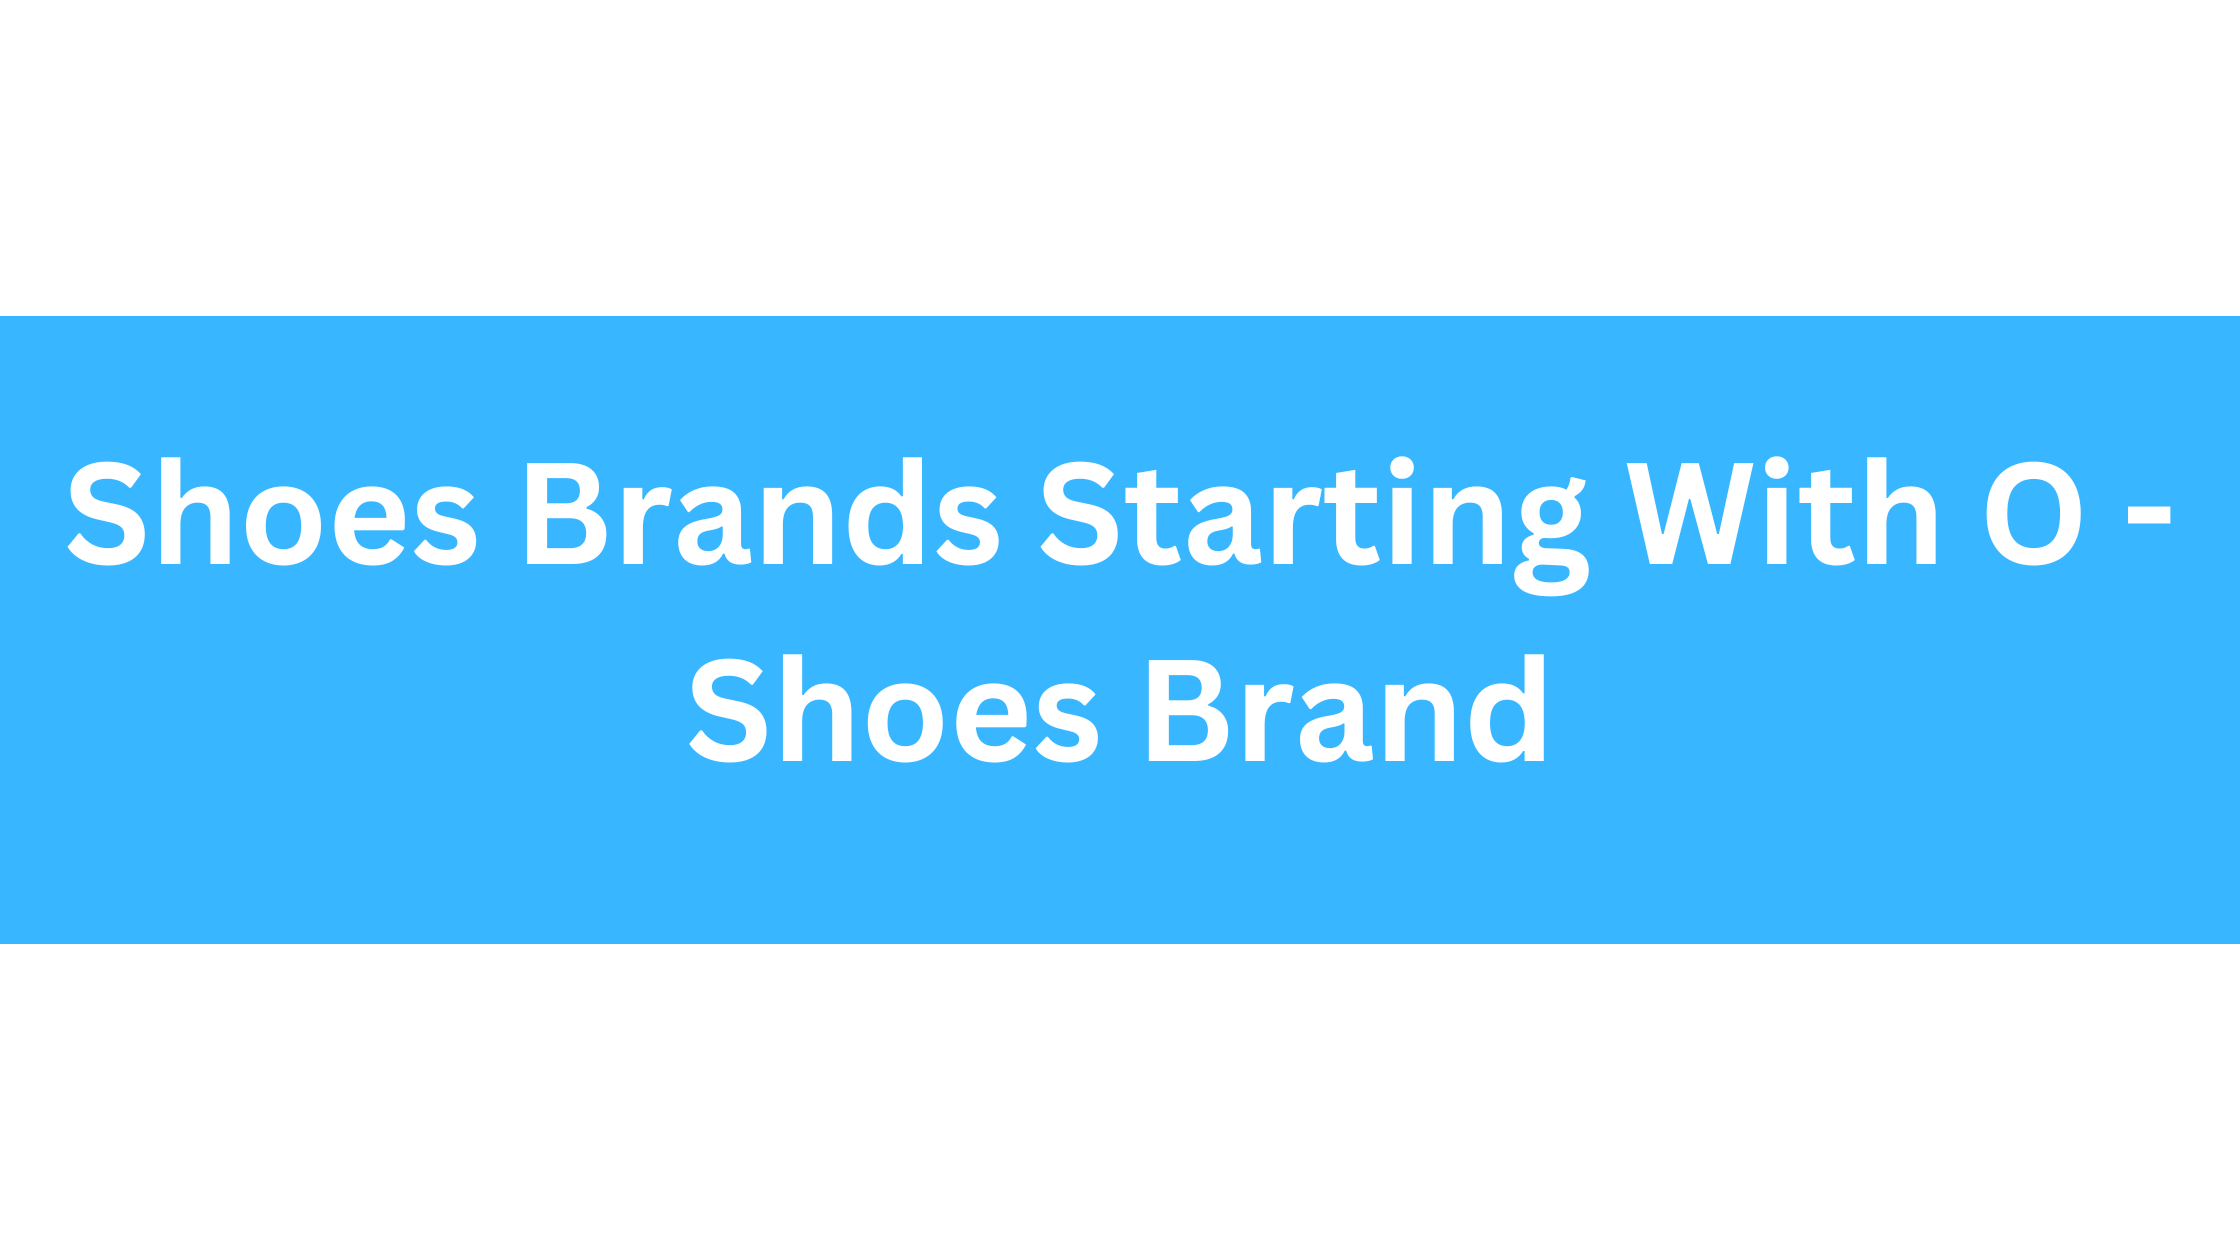 Shoes Brands Starting With O